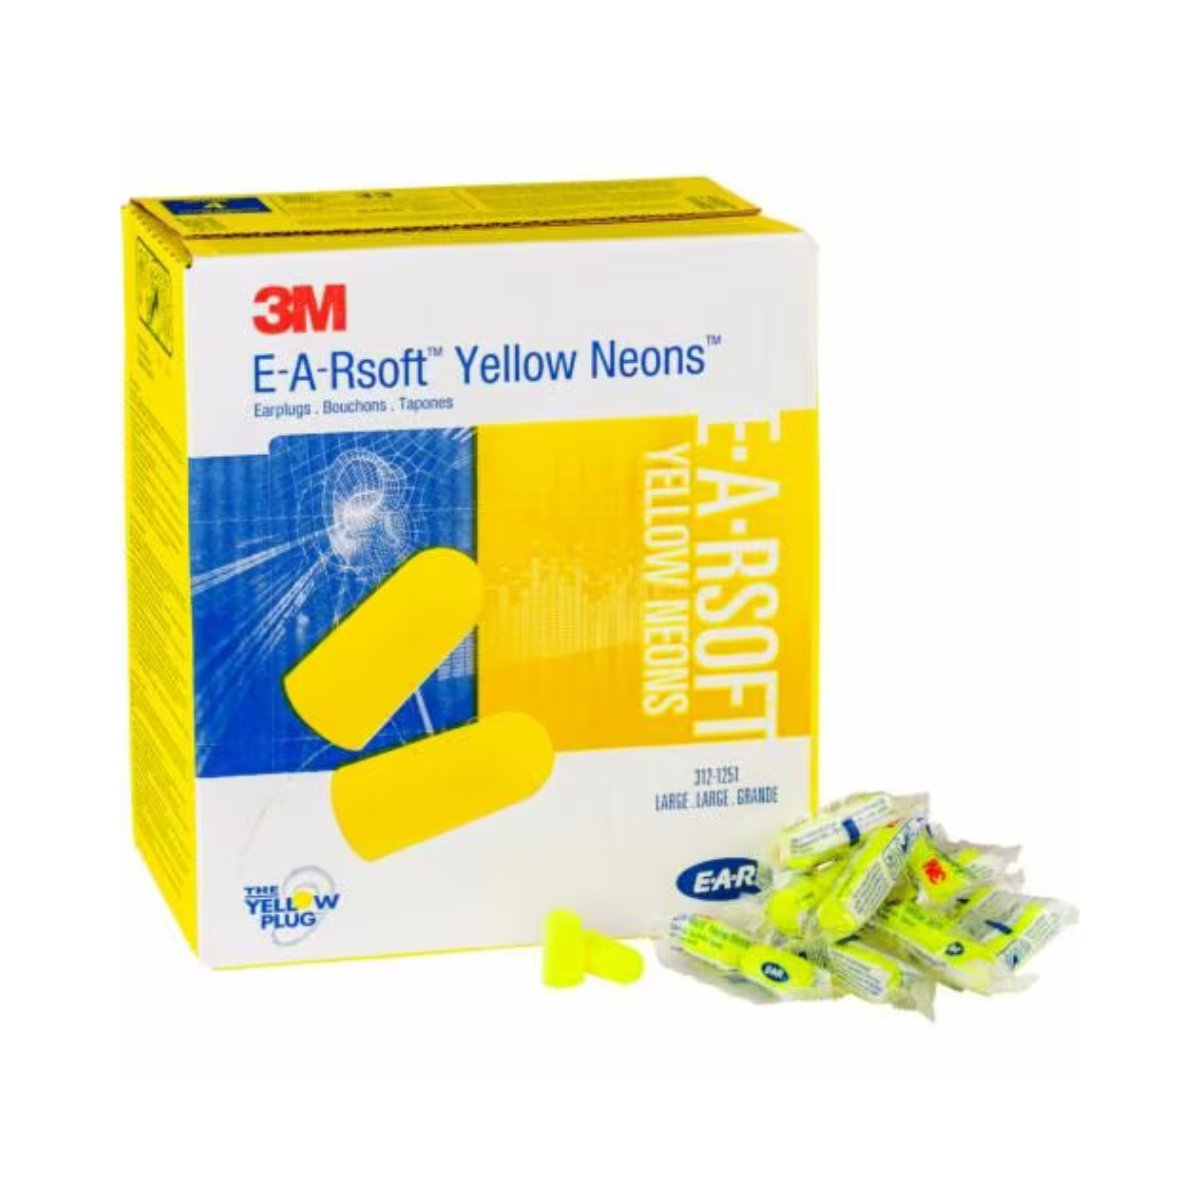 3M™ E-A-Rsoft™ Yellow Neons™ Large Uncorded, Poly Bag 312-1251 - 23dB (Class 4) (Box of 200 Pairs)